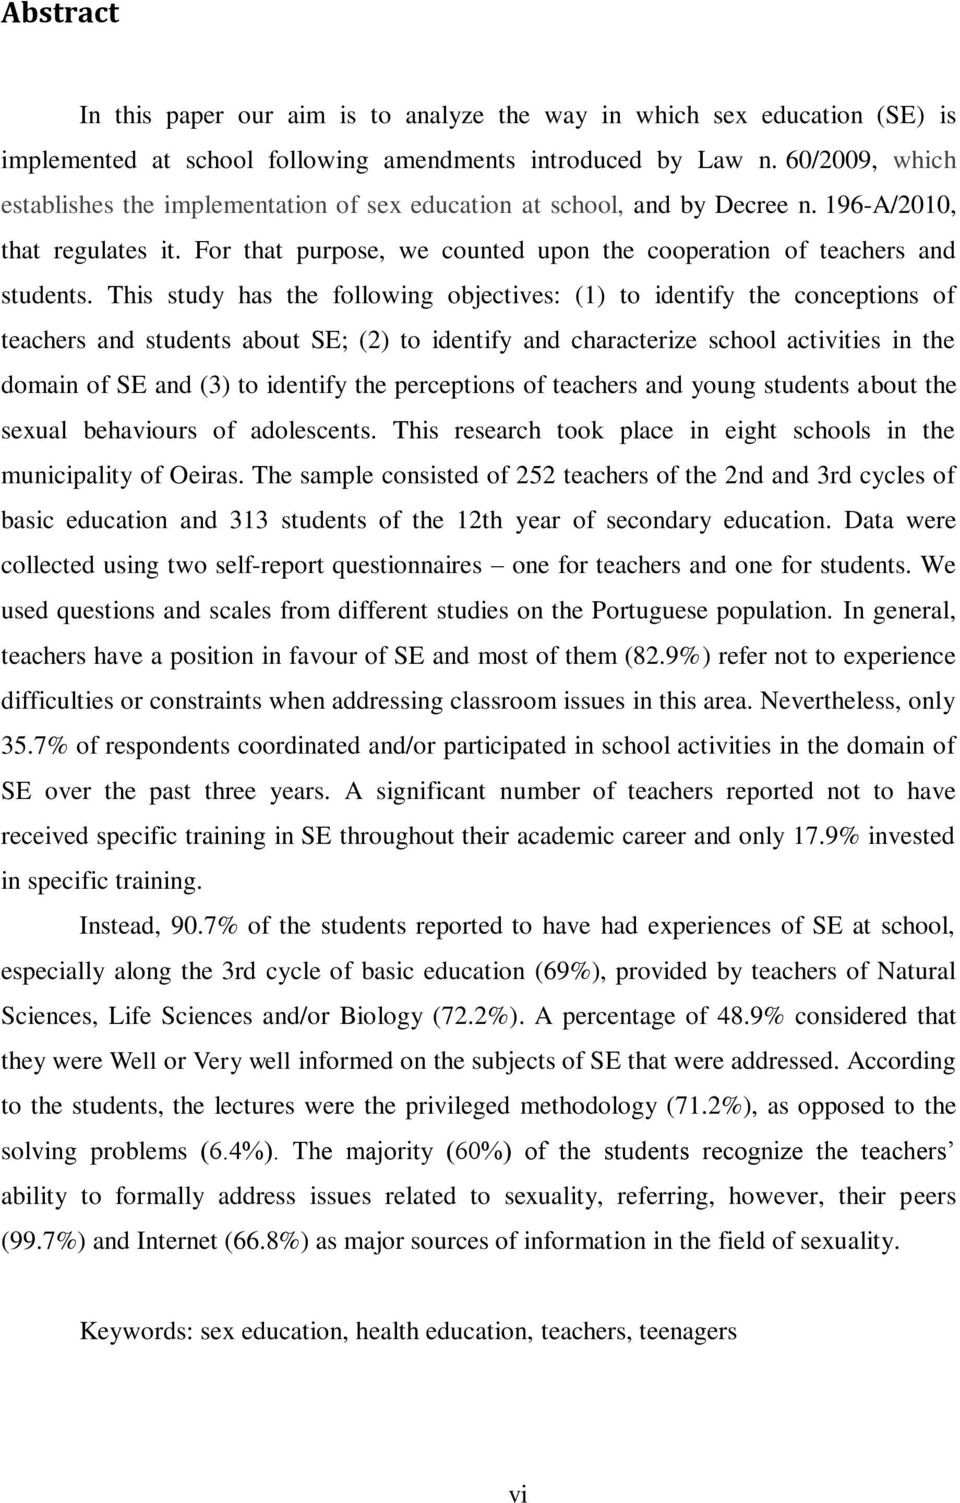 This study has the following objectives: (1) to identify the conceptions of teachers and students about SE; (2) to identify and characterize school activities in the domain of SE and (3) to identify